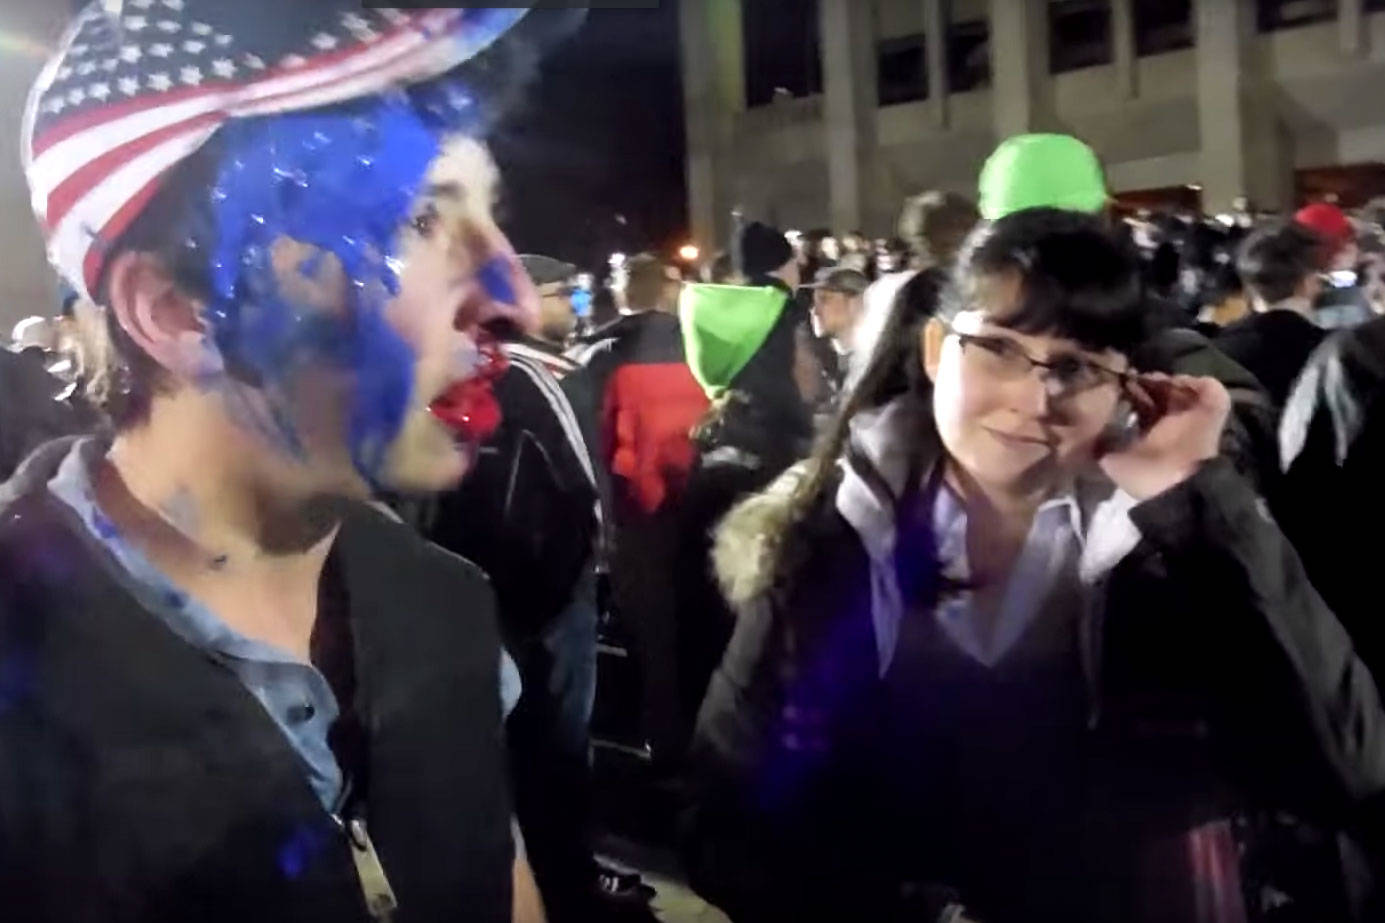 Elizabeth Hokoana, right, seen in an amateur video captured shortly before the shooting. To the left is a Milo Yiannopoulos fan who says he was punched by protesters. Photo via YouTube